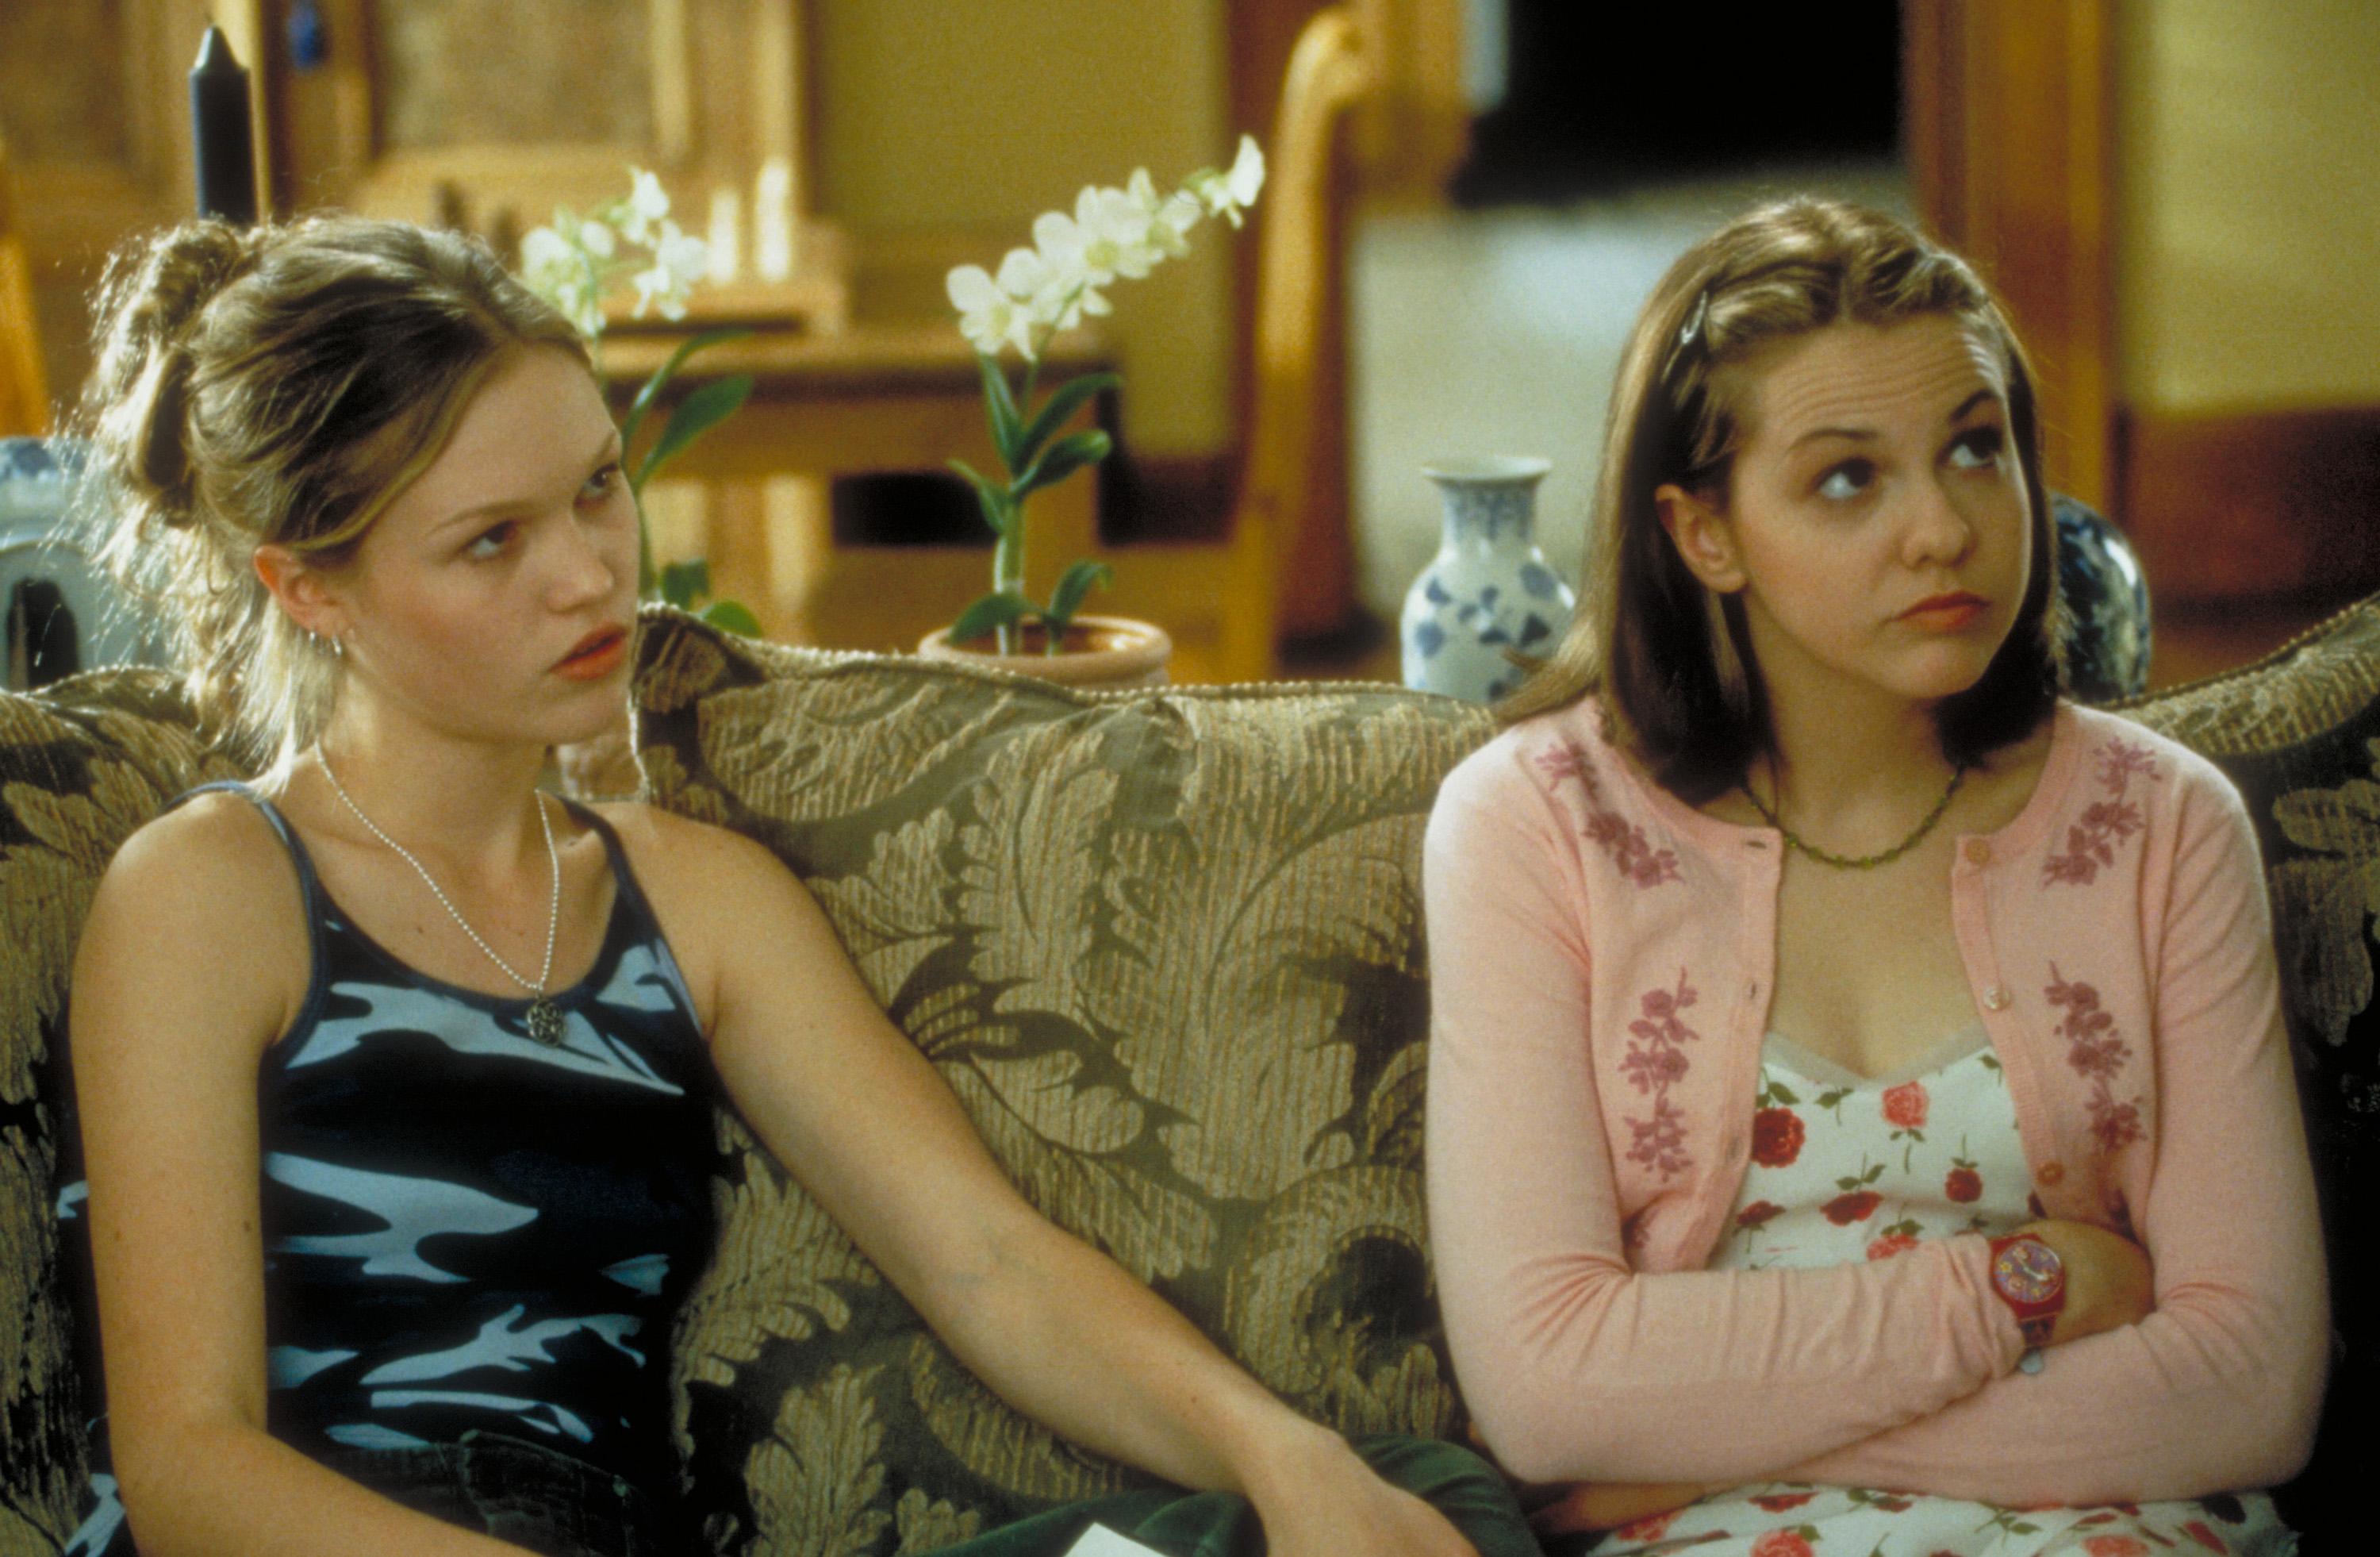 Kat and Bianca, 10 Things I Hate About You, 1999.